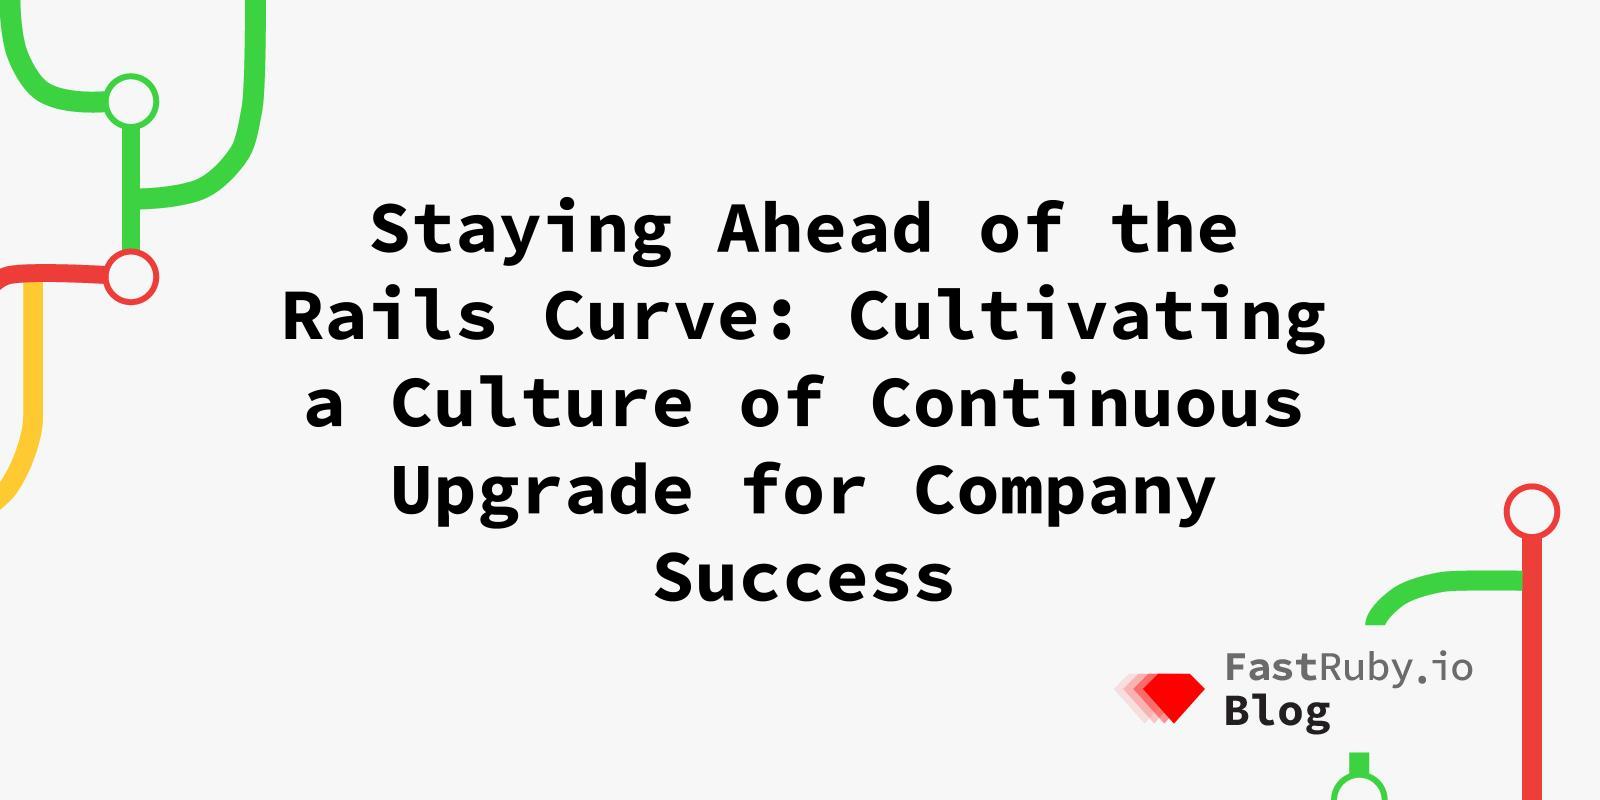 Staying Ahead of the Rails Curve: Cultivating a Culture of Continuous Upgrade for Company Success